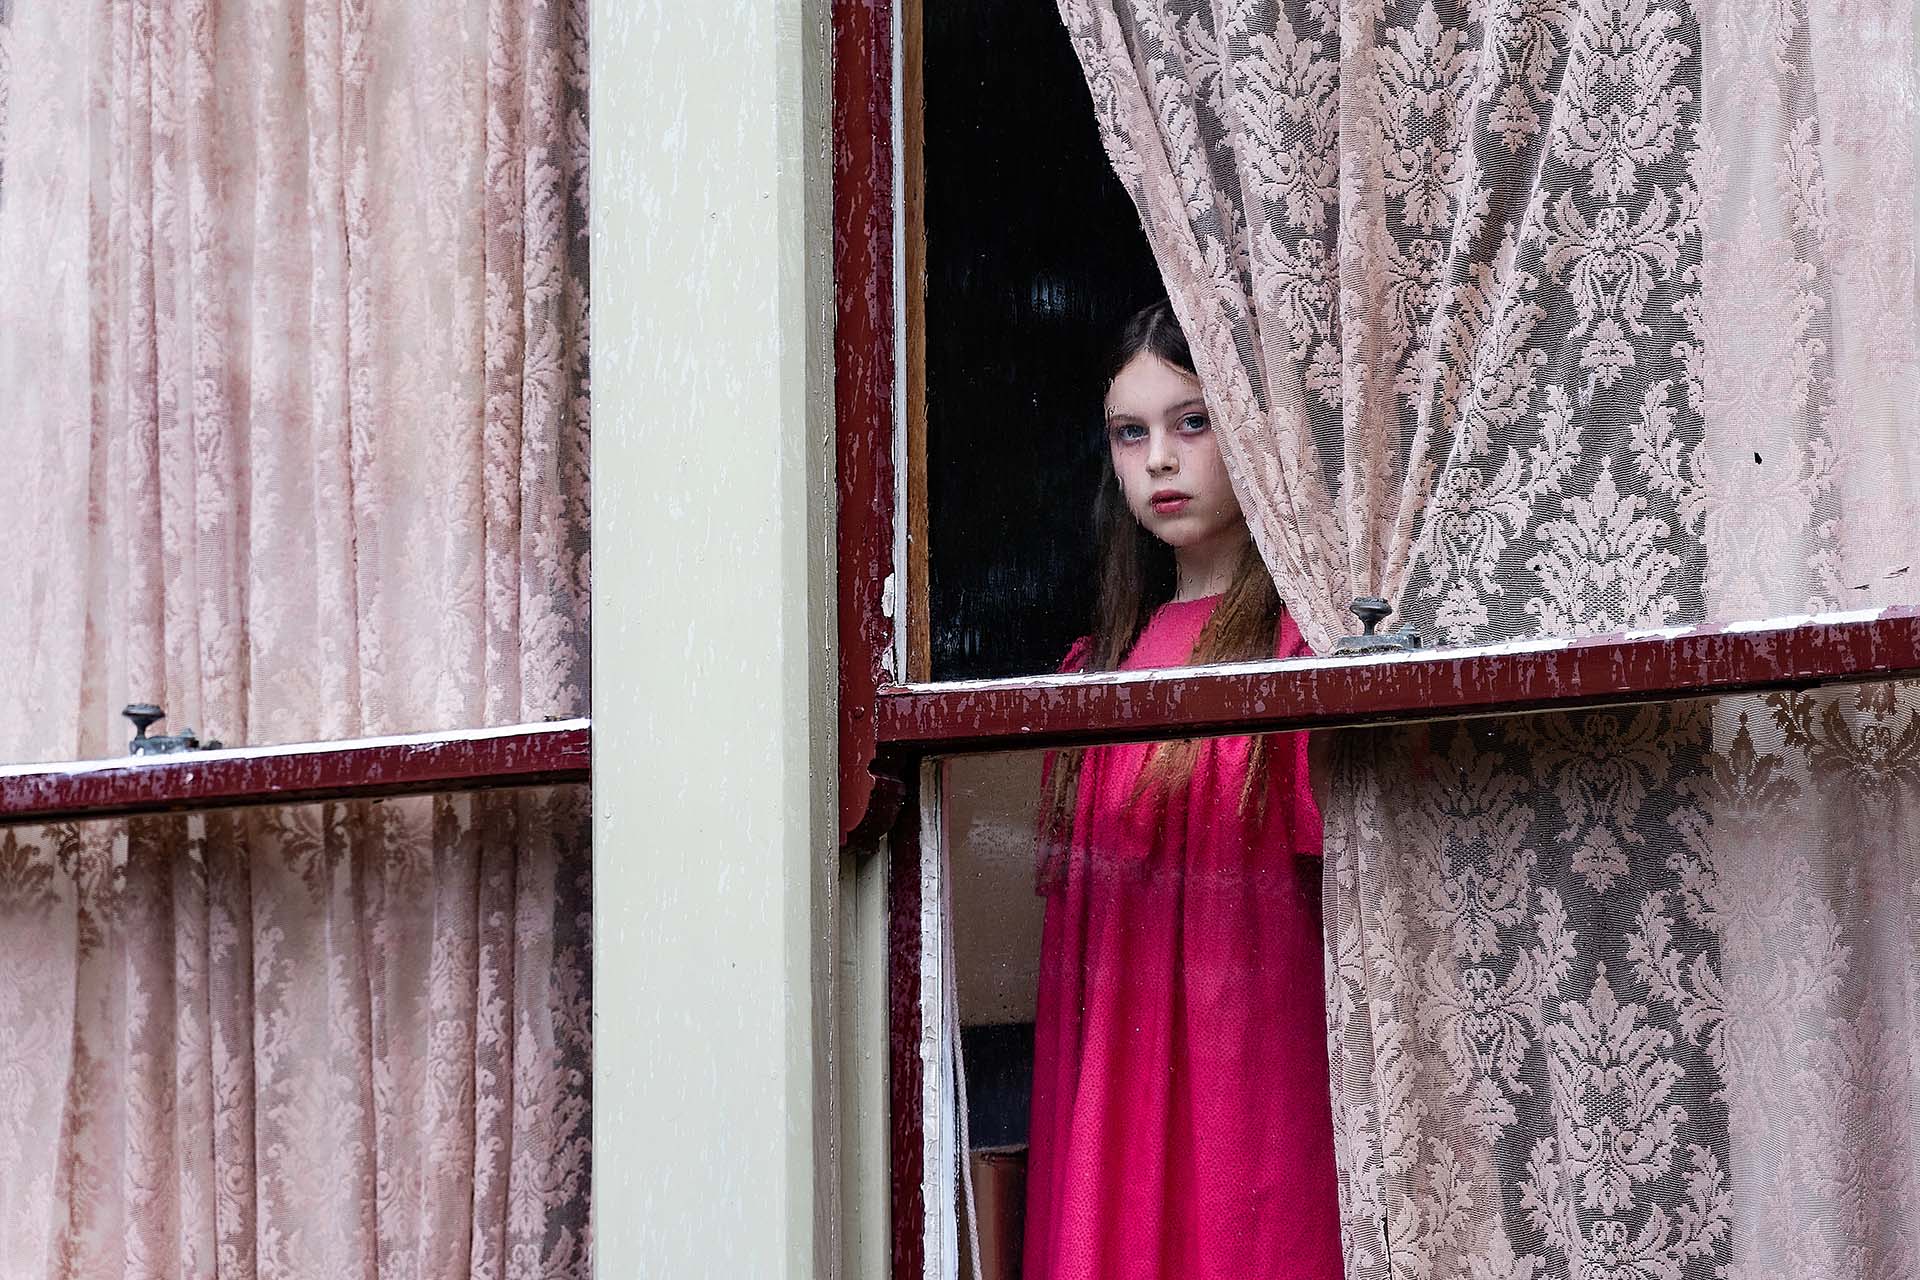 Reunion film still, girl looking out the window